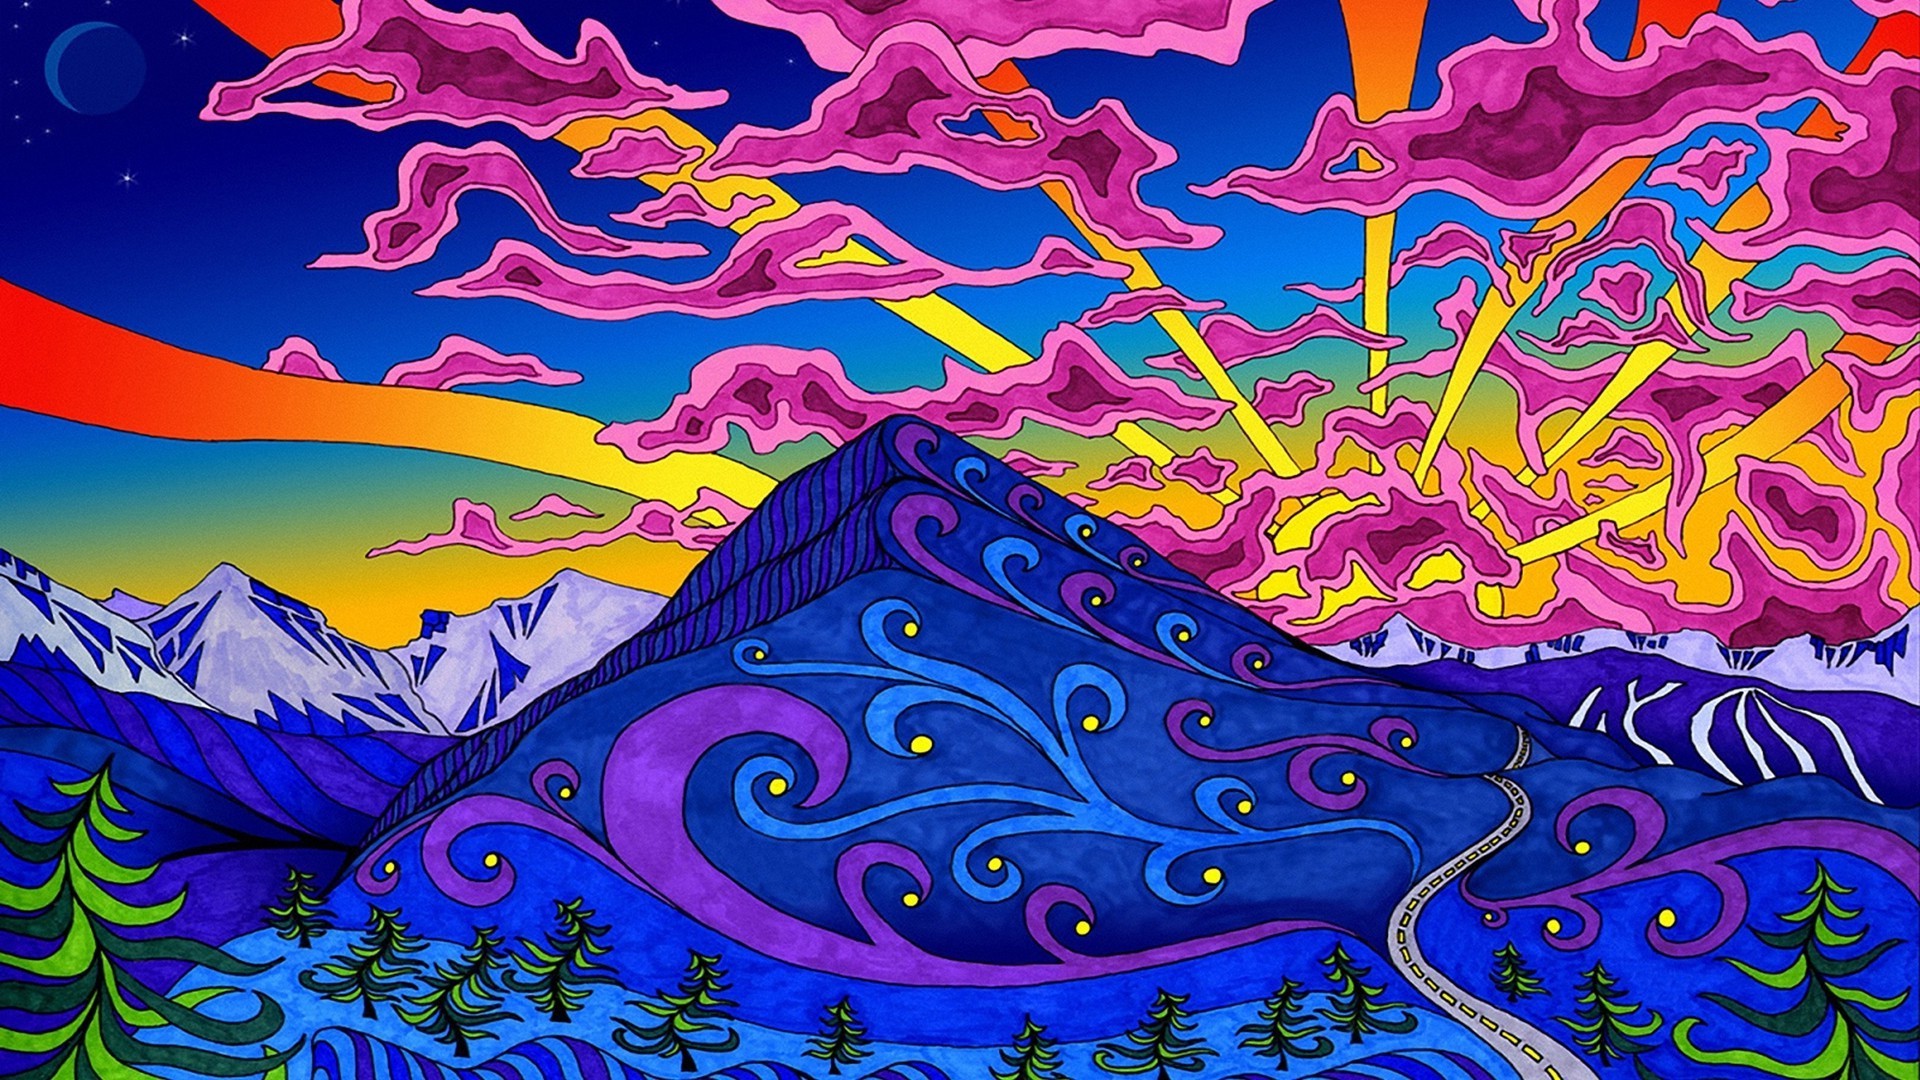 4 elements of nature psychedelic